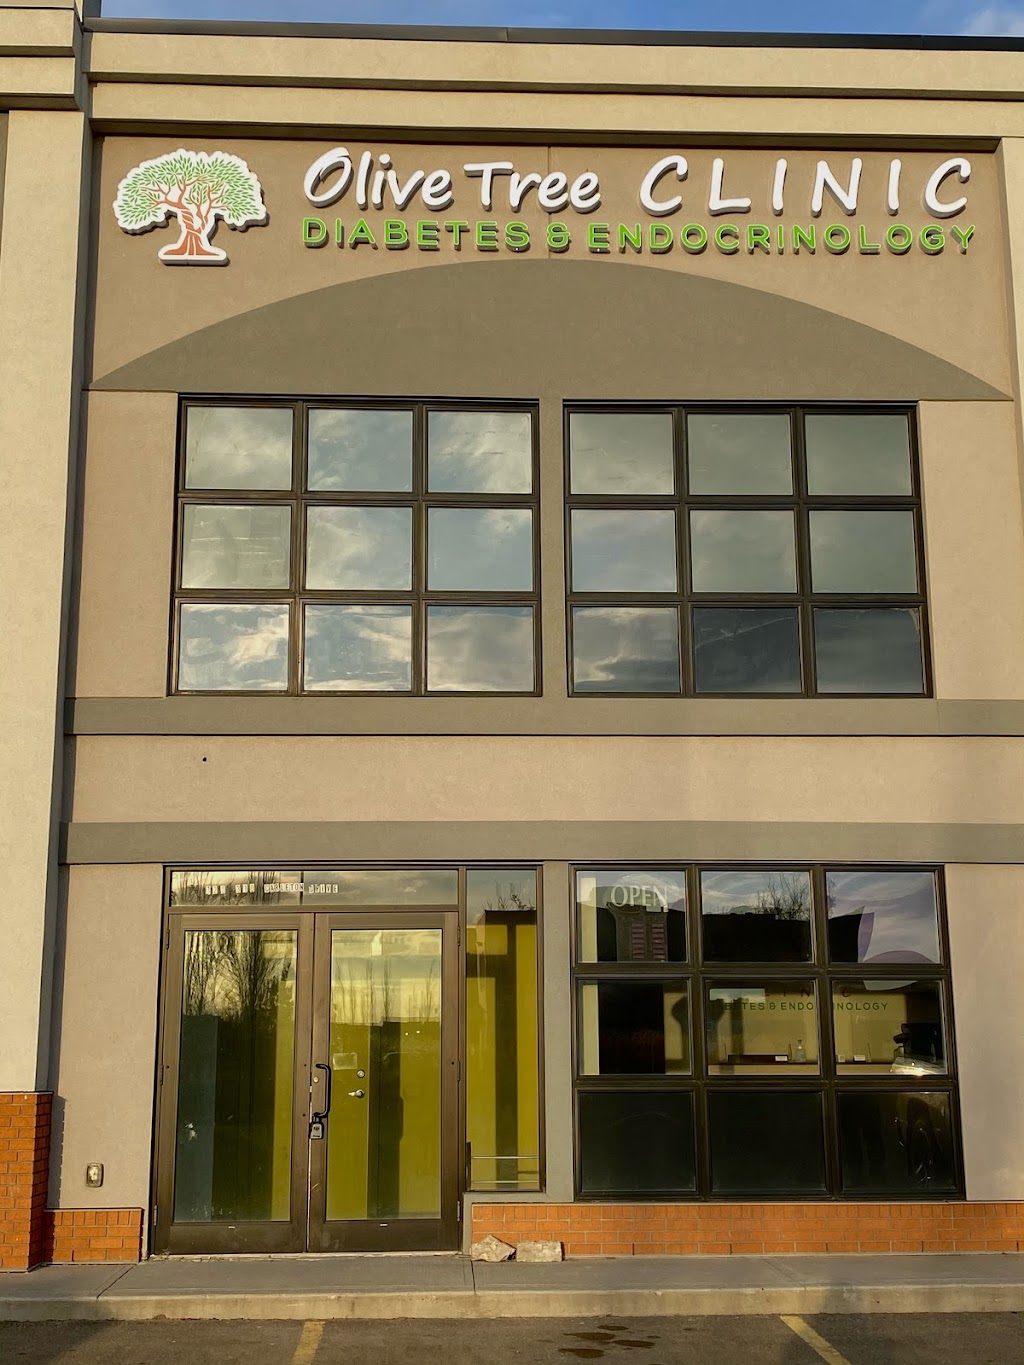 Olive Tree Clinic Diabetes & Endocrinology | doctor | 310 Carleton Dr #120, St. Albert, AB T8N 7L3, Canada | 7804601316 OR +1 780-460-1316